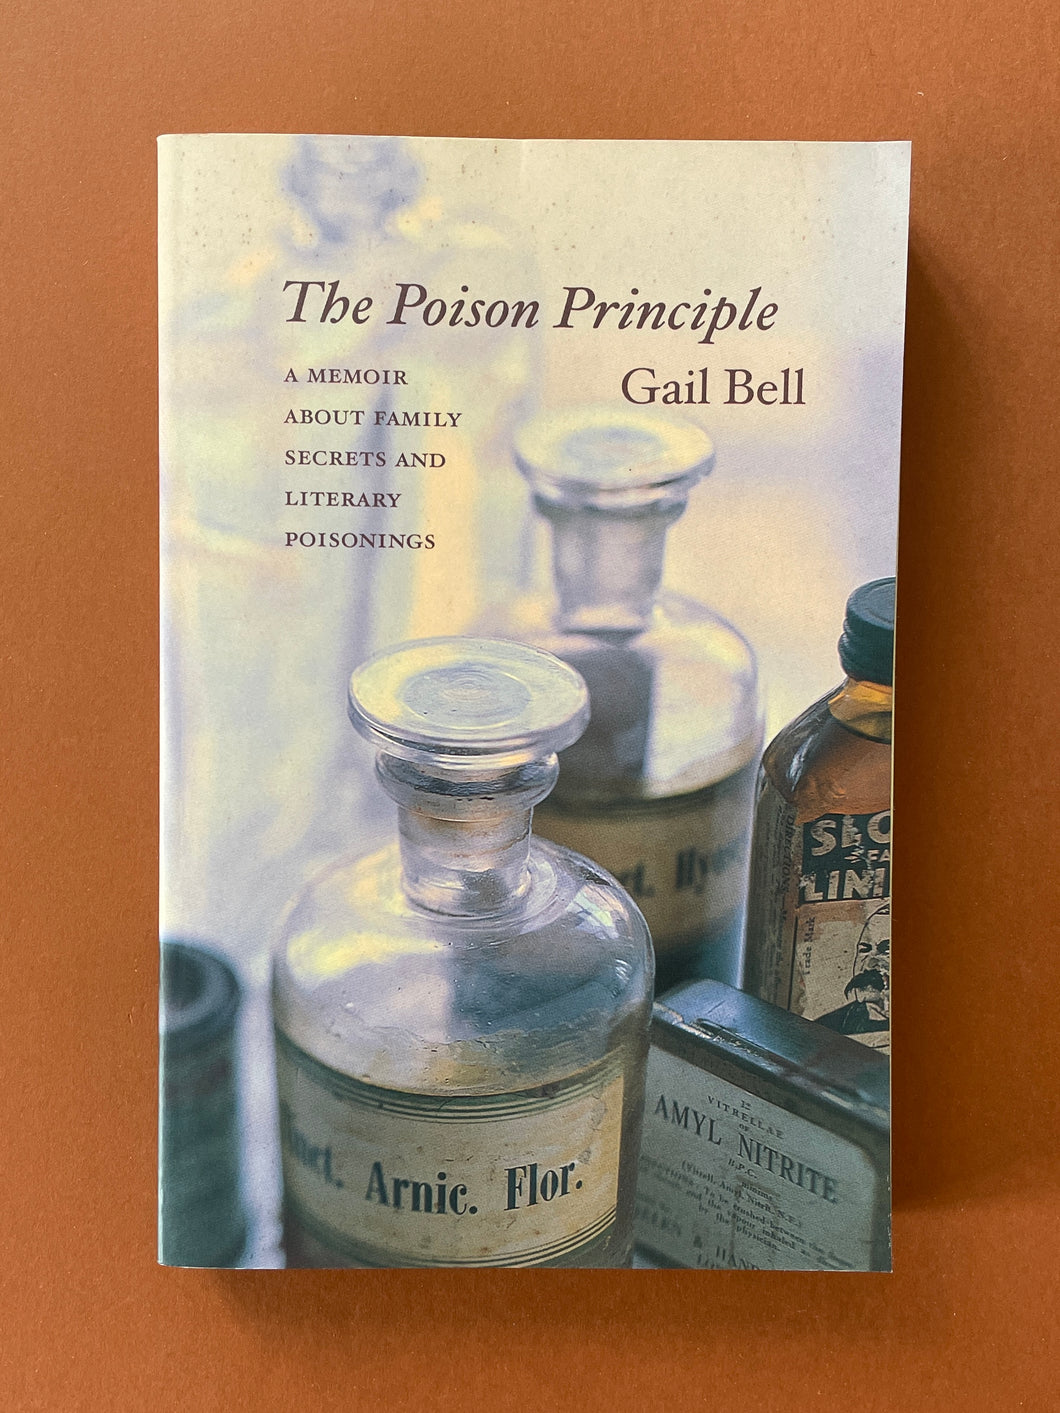 The Poison Principle by Gail Bell: photo of the front cover which shows very minor scuff marks along the edges.